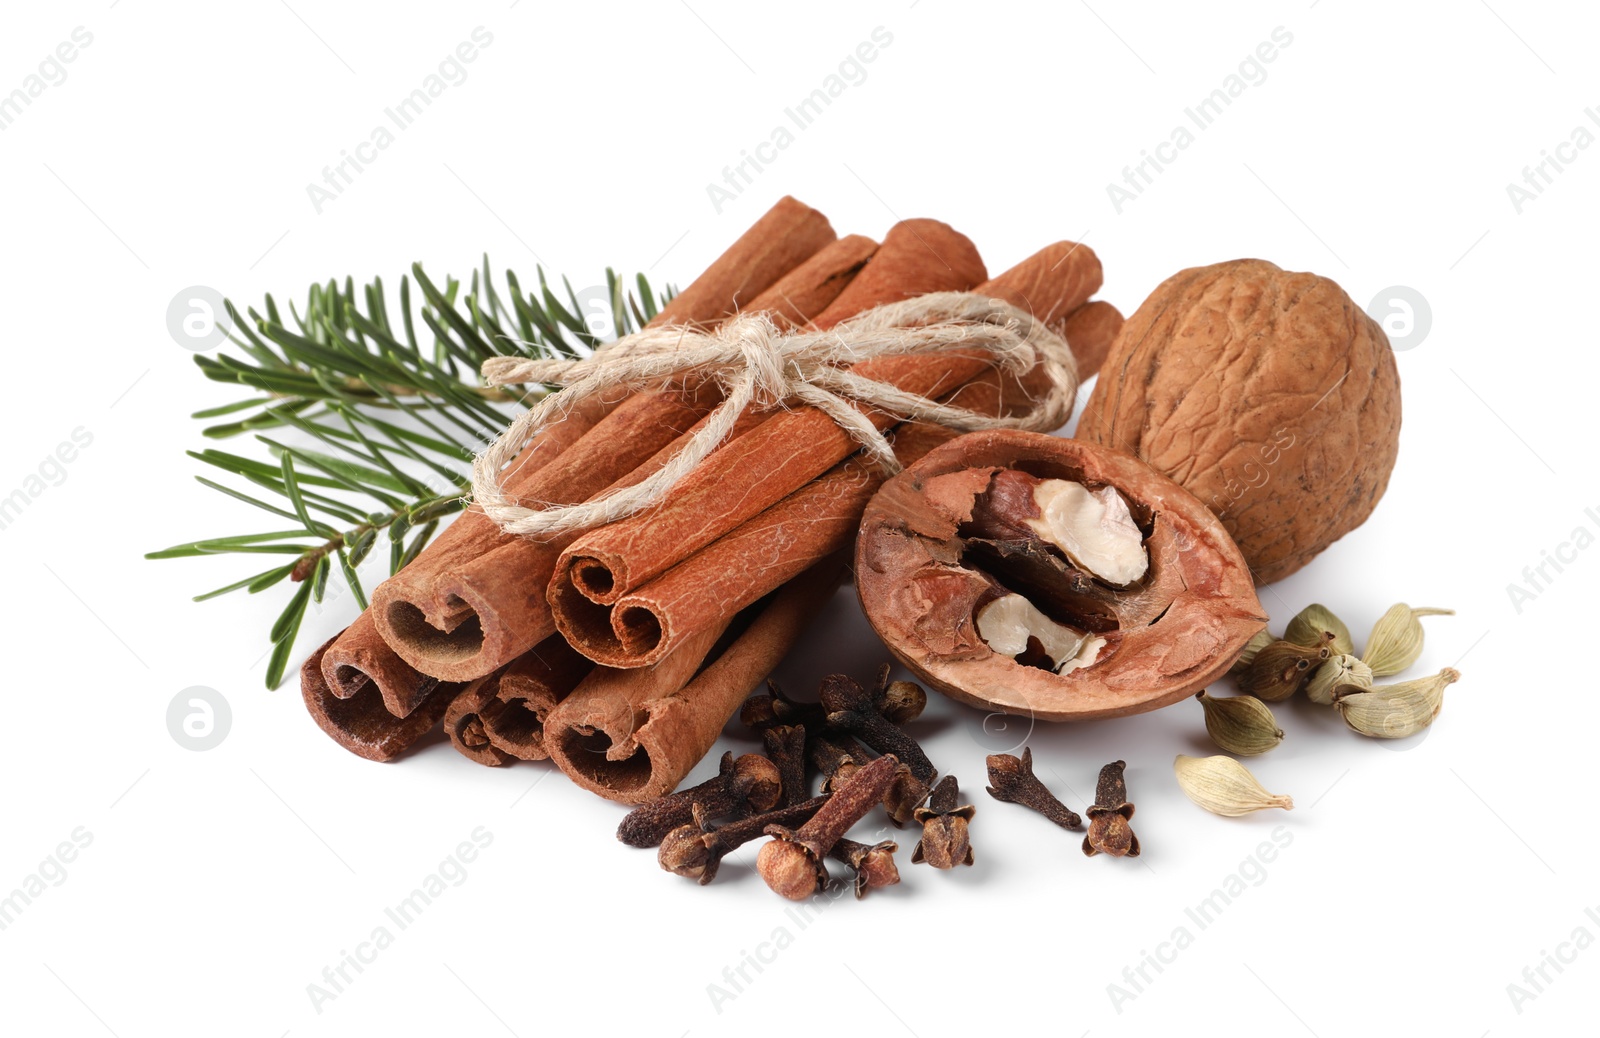 Photo of Different spices, nuts and fir branches on white background